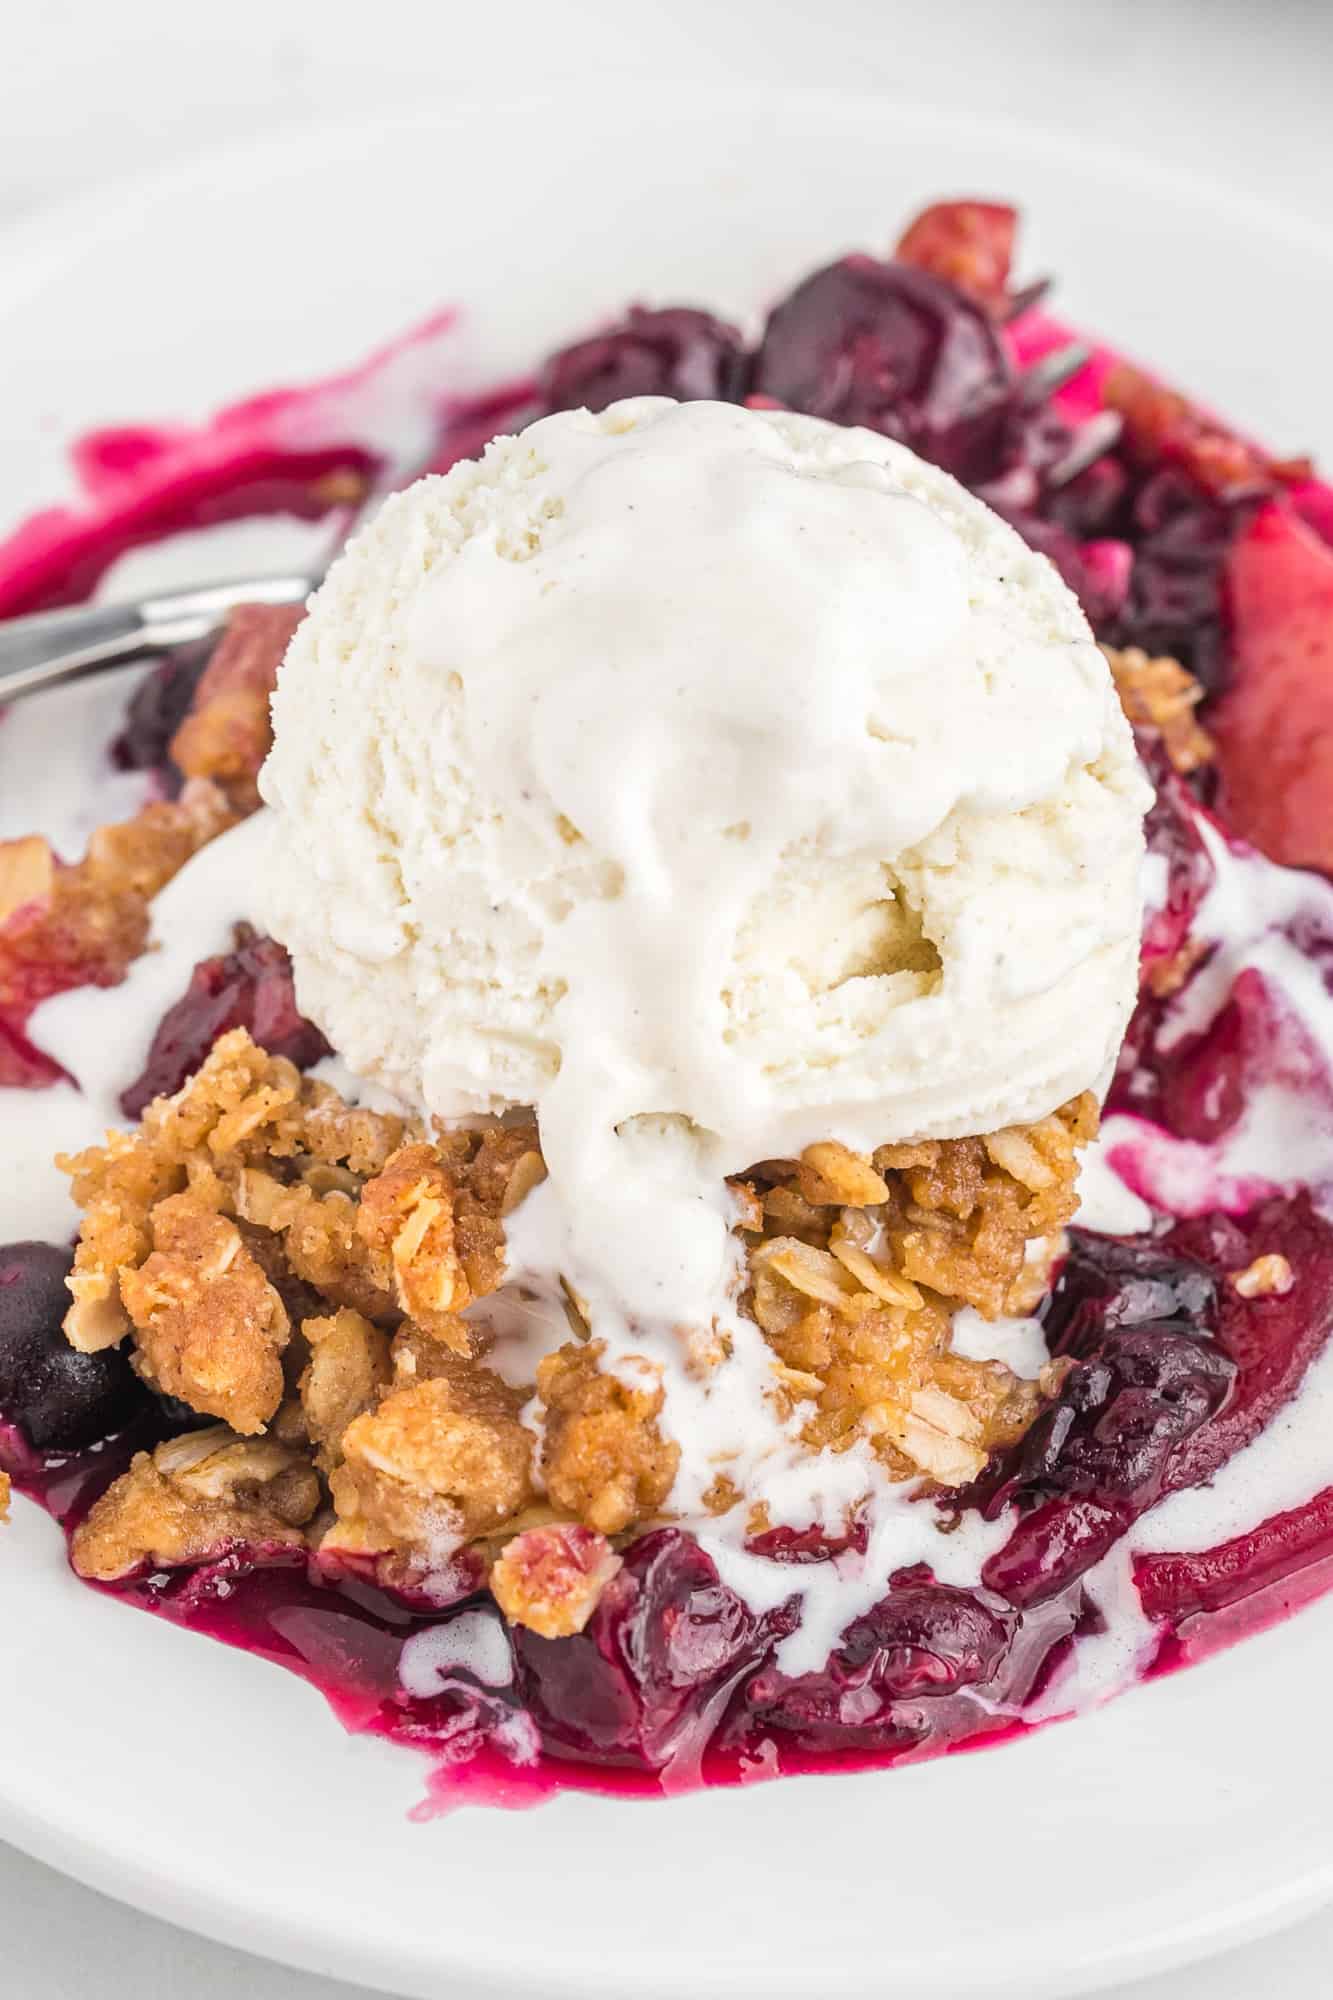 Apple crisp with blueberries and a large scoop of melting ice cream.